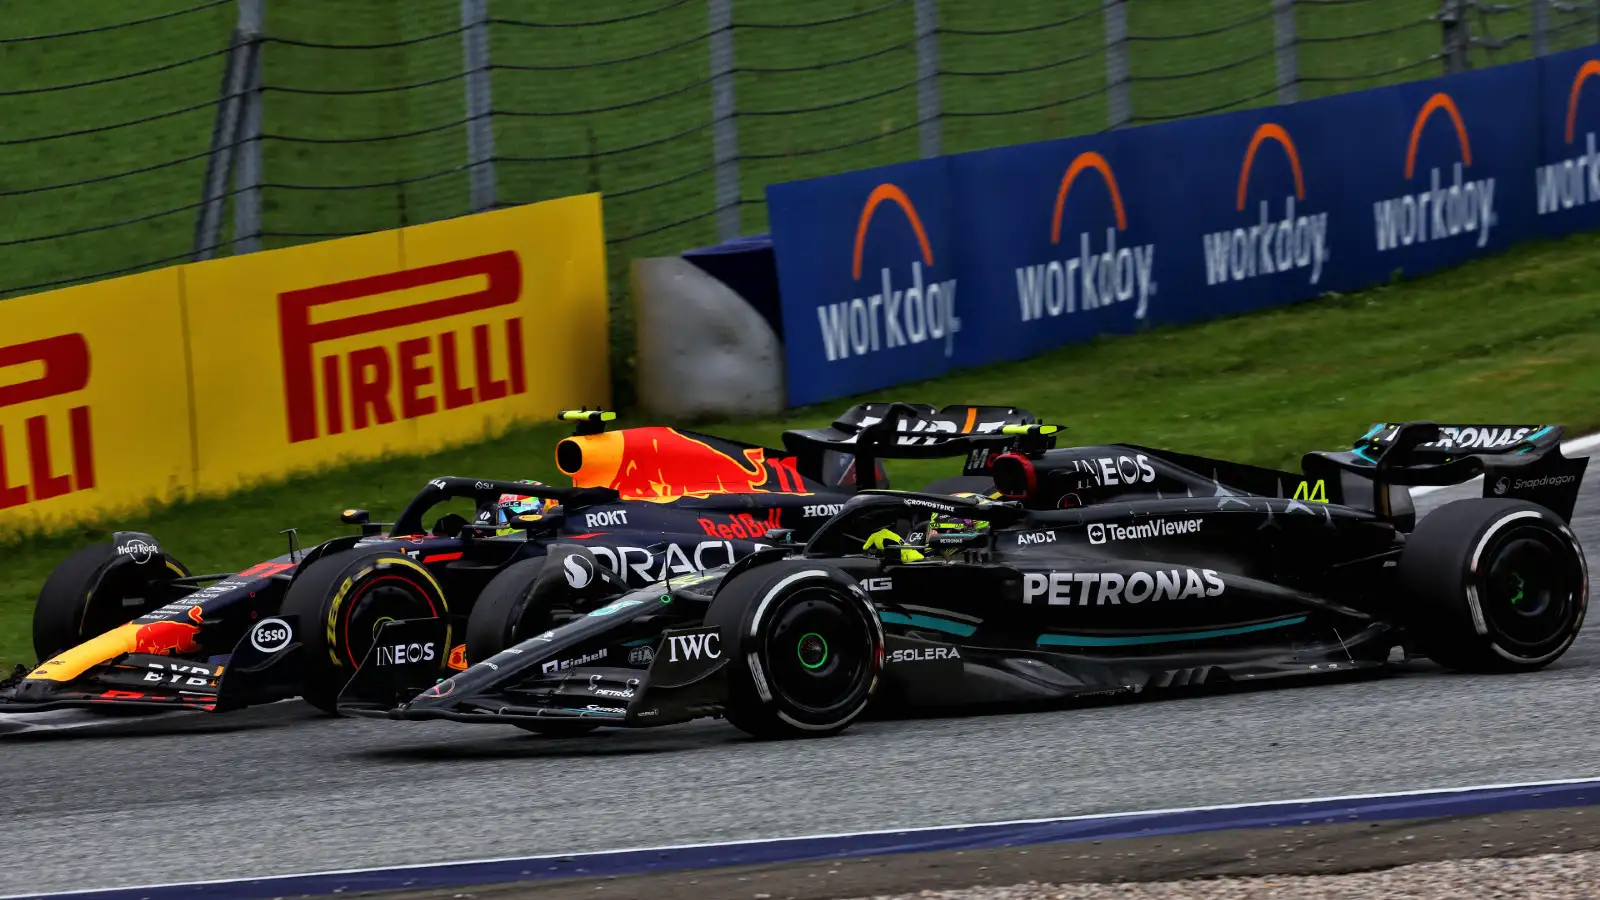 Red Bul driver Sergio Perez battles with Mercedes' Lewis Hamilton at the Austrian Grand Prix. Spielberg, July 2023. Track limits